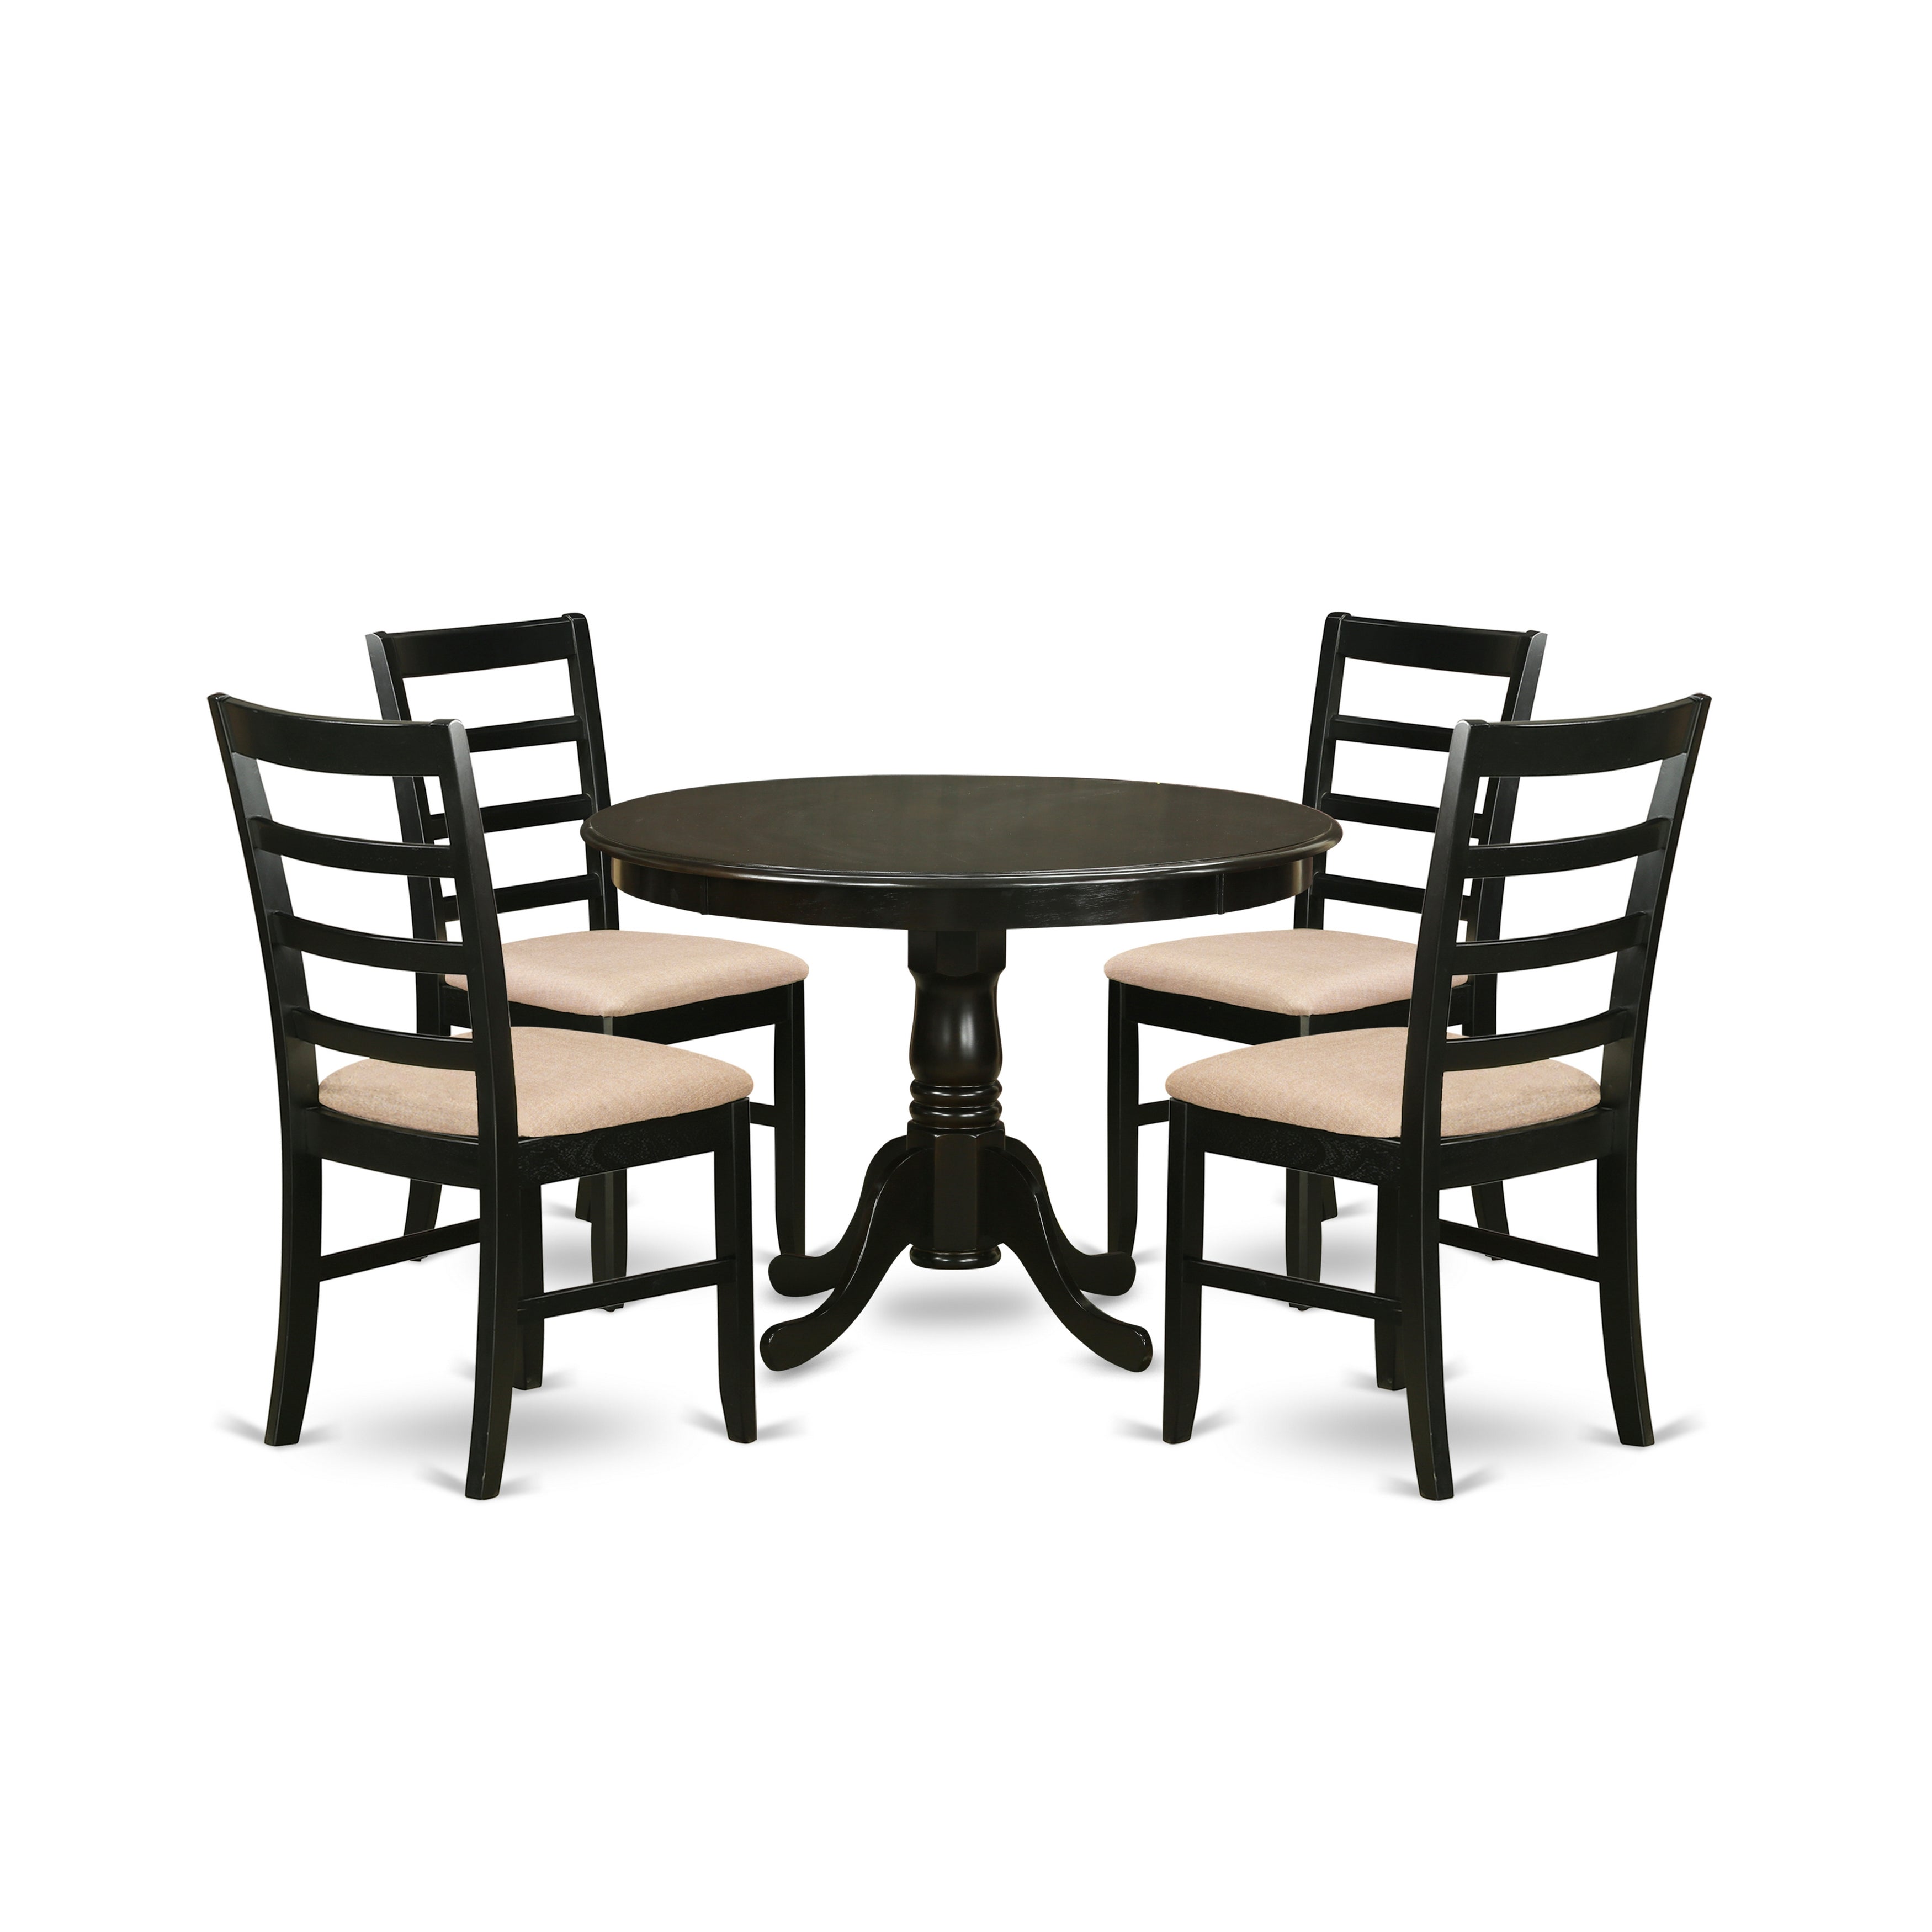 HLPF5-CAP-C 5 PC small Kitchen Table set-Dining Table and 4 Kitchen Chairs.